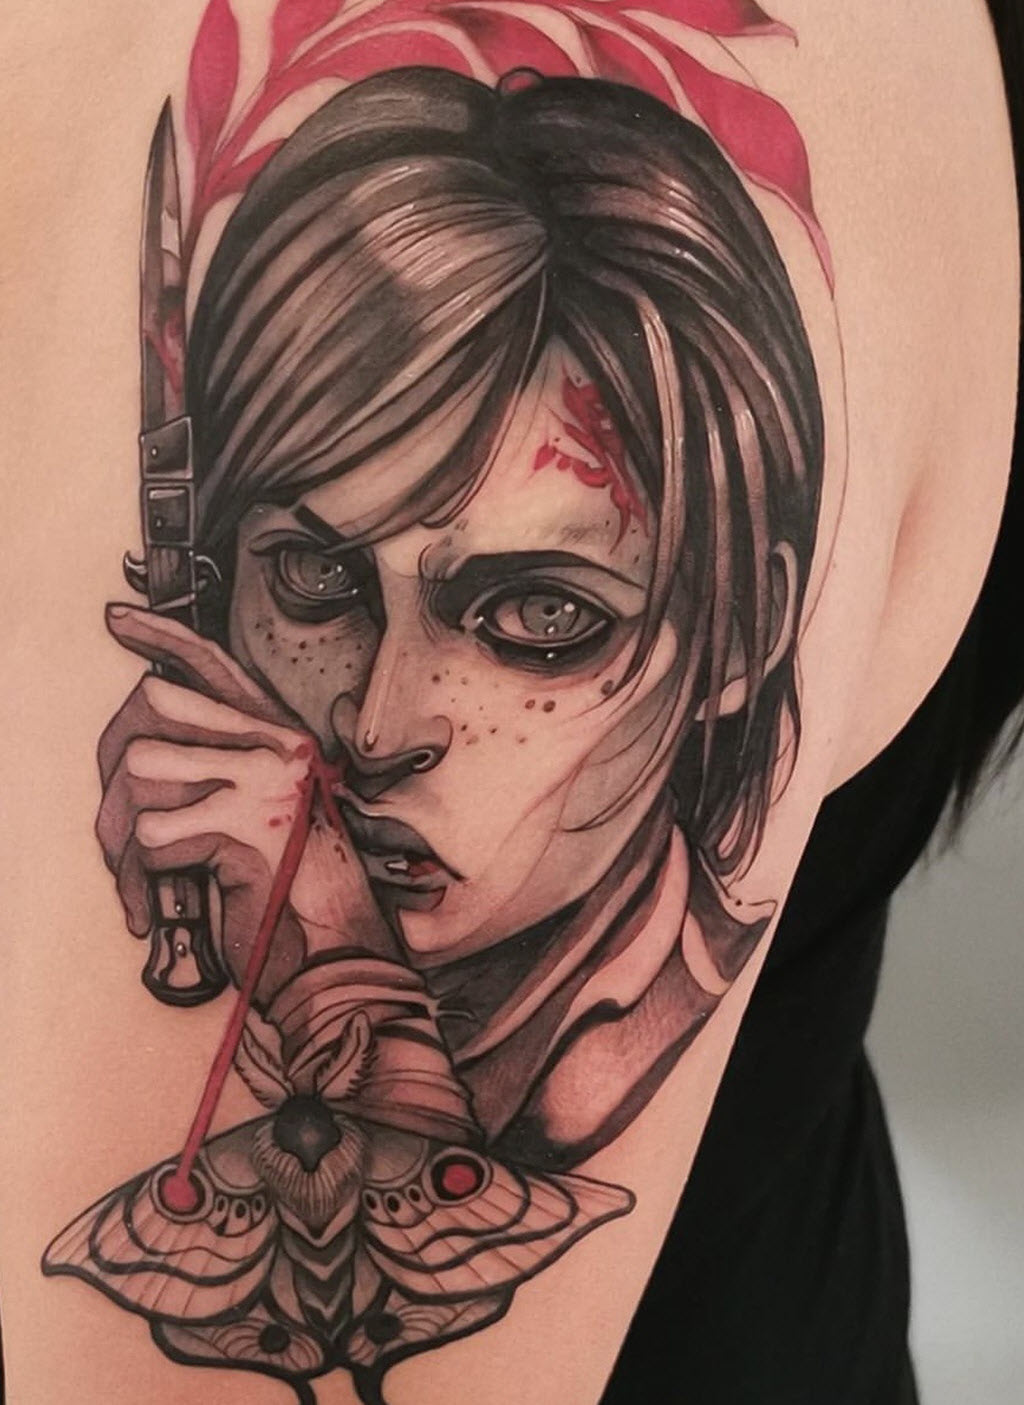 Naughty Dog, LLC - We love this colorful take on Ellie's tattoo